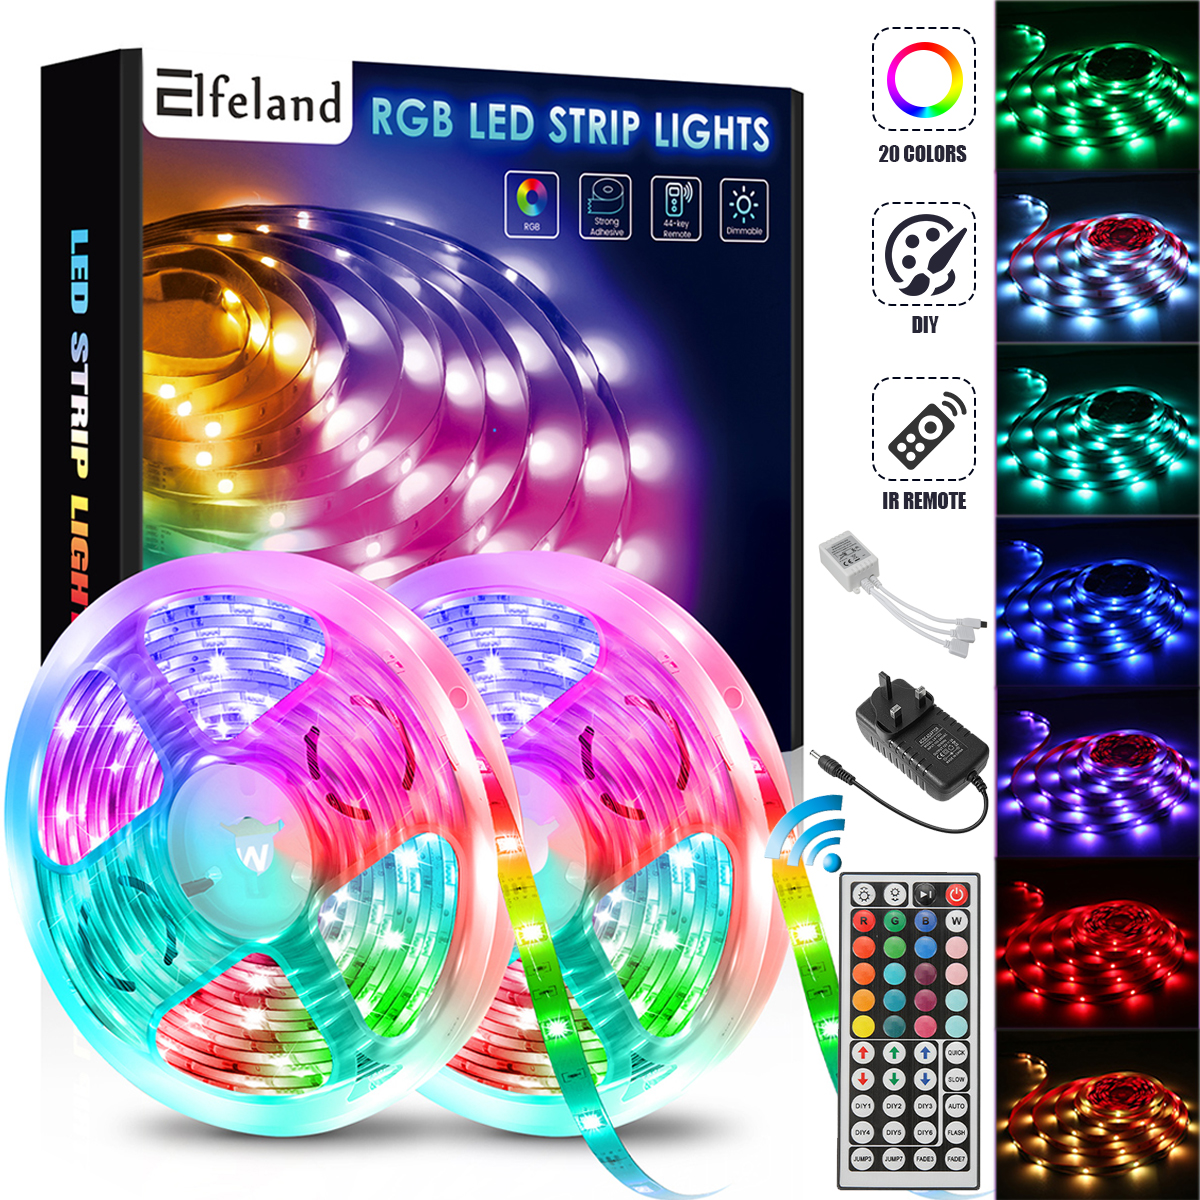 Find Elfeland 20m 65 6FT SMD Led Strip Lights 360LED RGB 5050 Strip Light Non Waterproof Flexible DC12V With 44 Key Remote Control for Sale on Gipsybee.com with cryptocurrencies